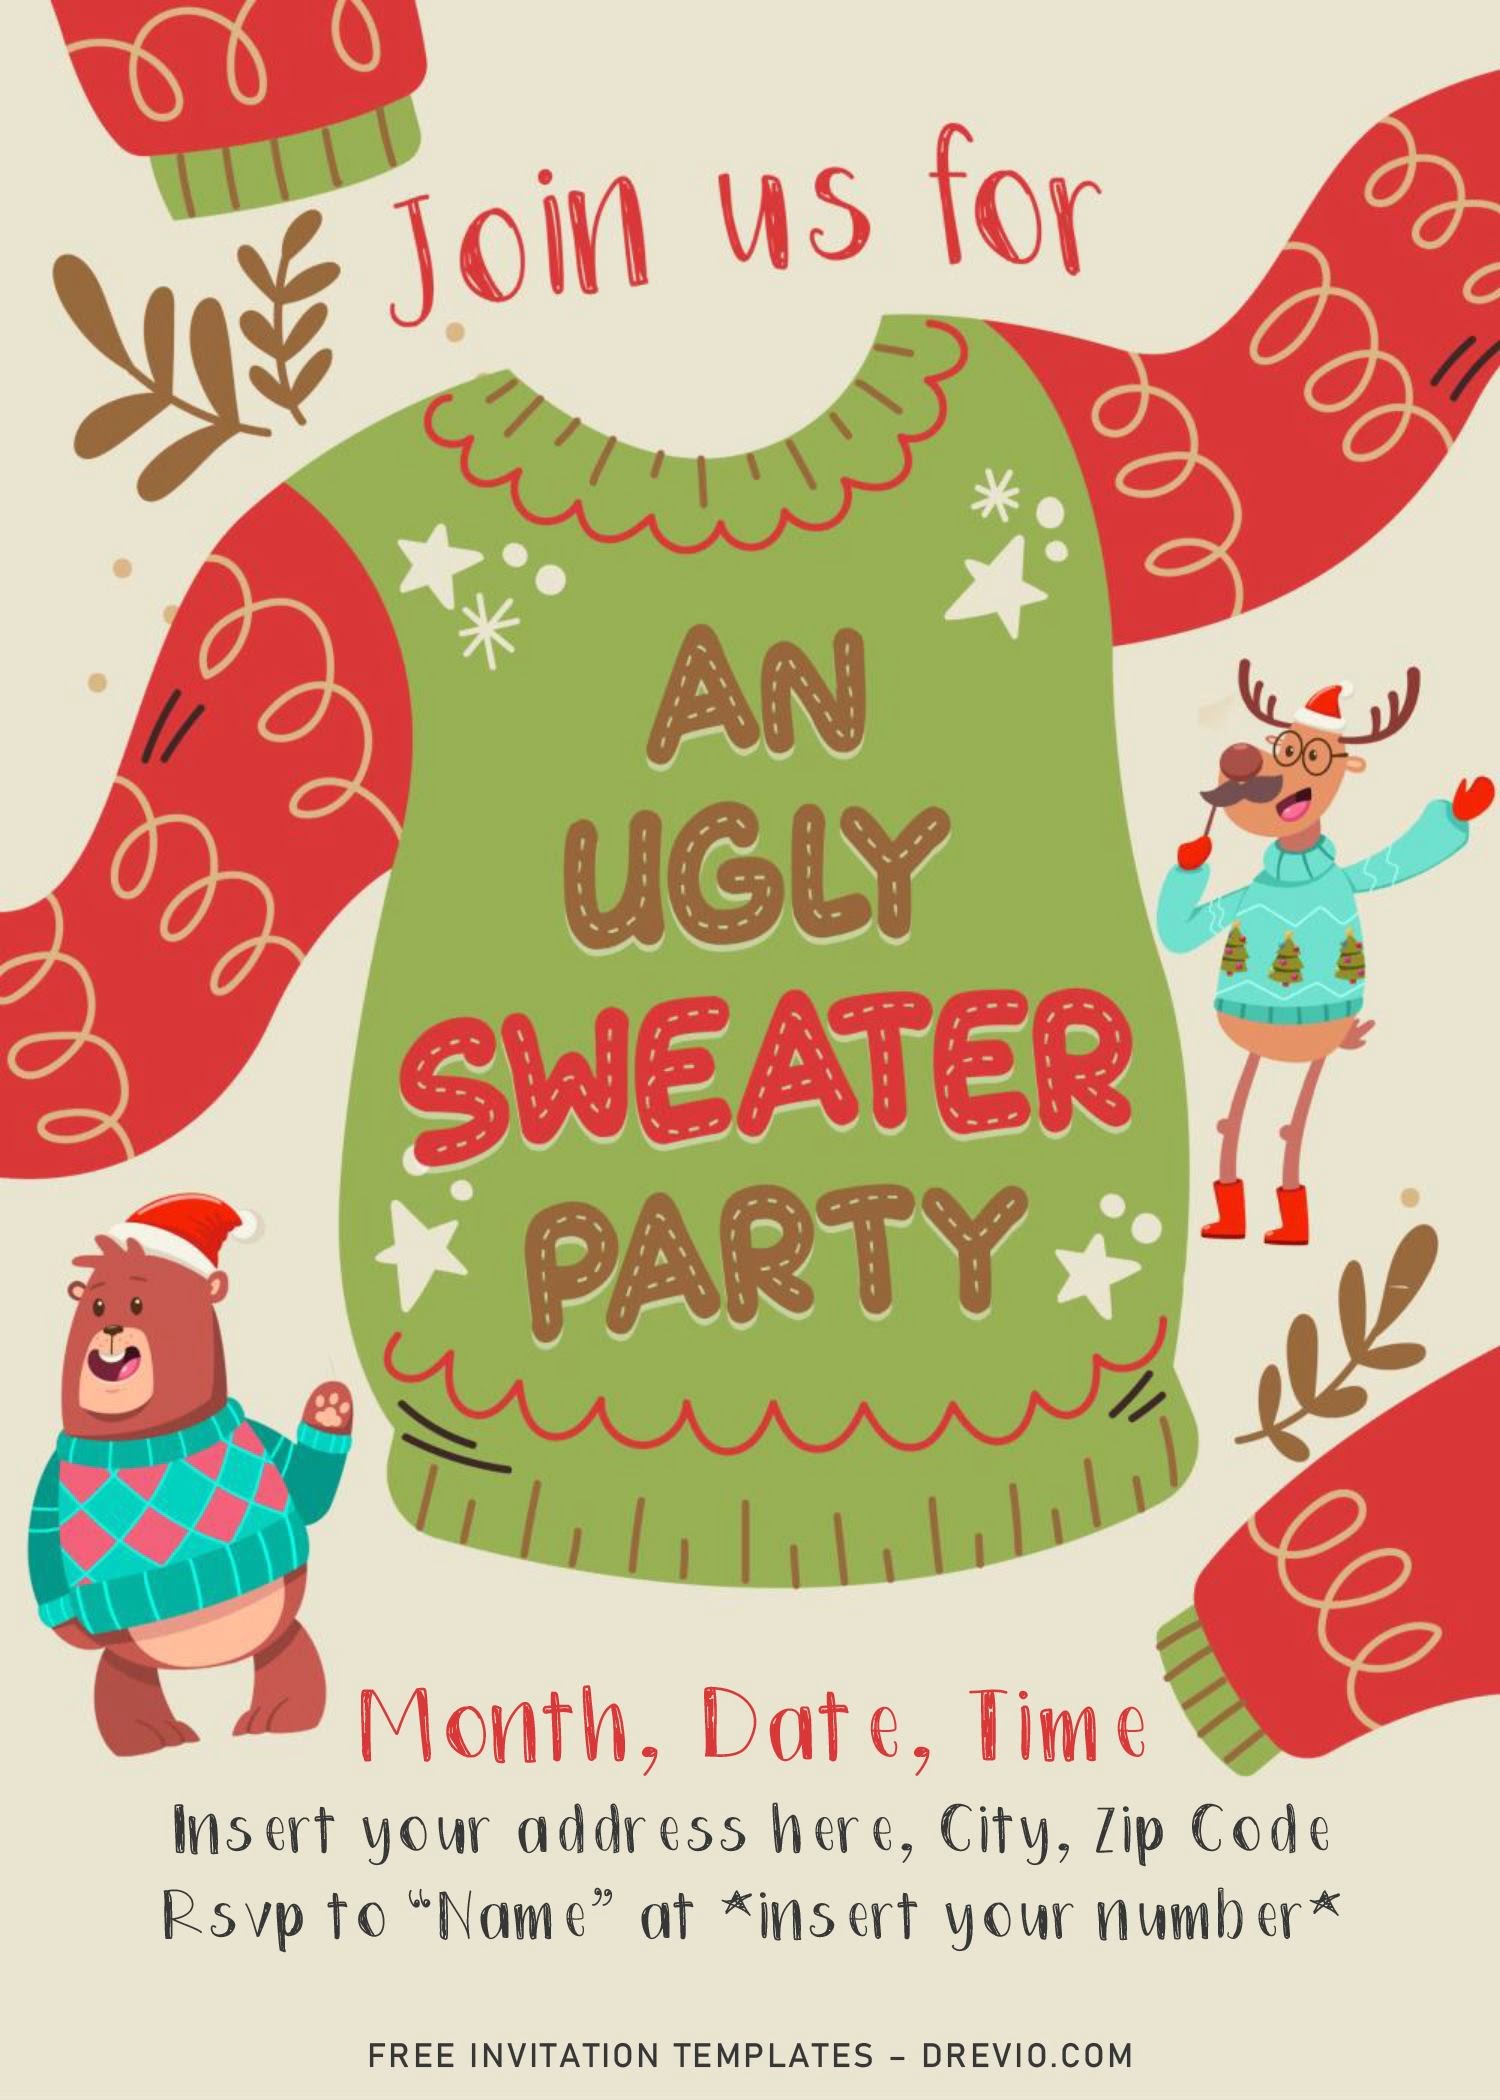 Free Ugly Sweater Party Invitation Templates For Word Download Hundreds FREE PRINTABLE Birthday Invitation Templates